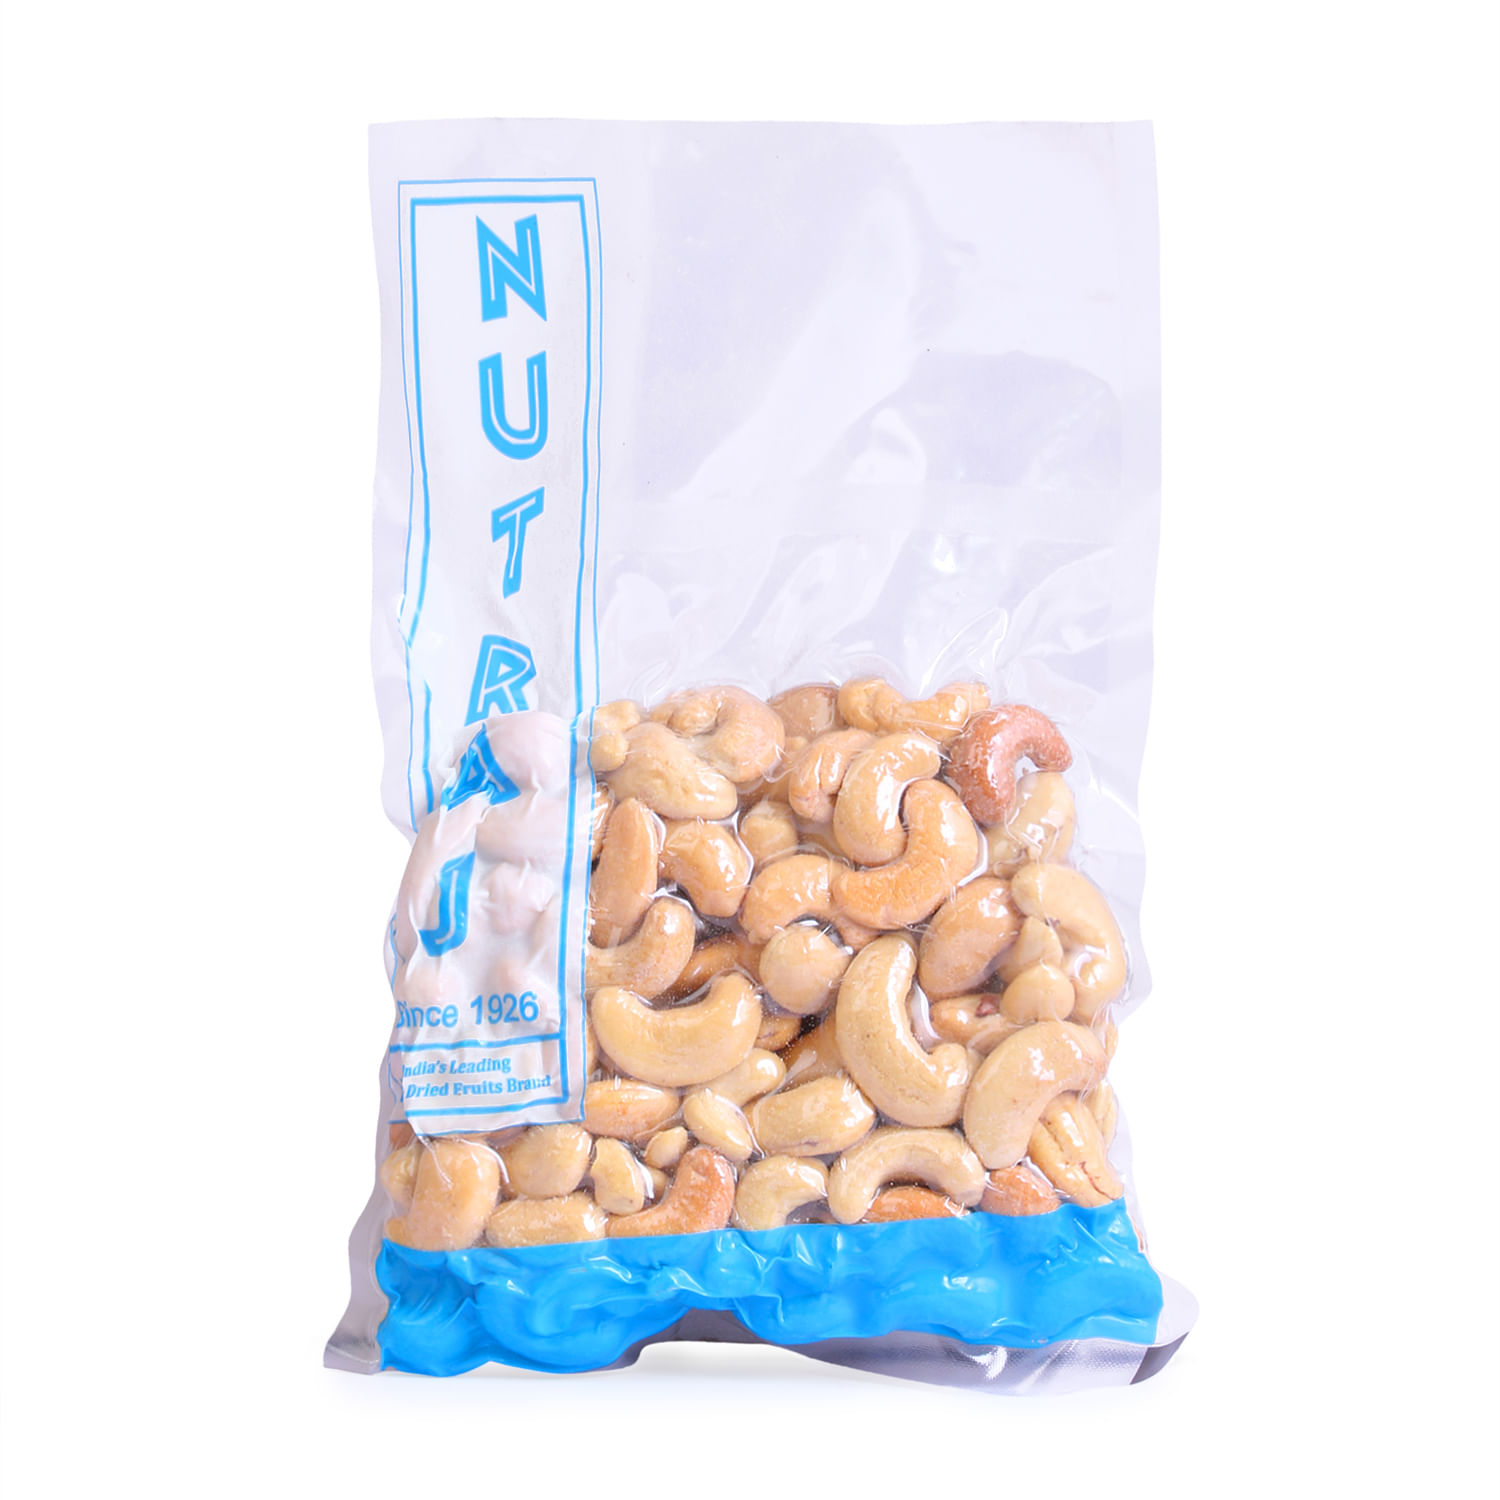 Nutraj Signature Roasted and Salted Cashew 200g - Vacuum Pack